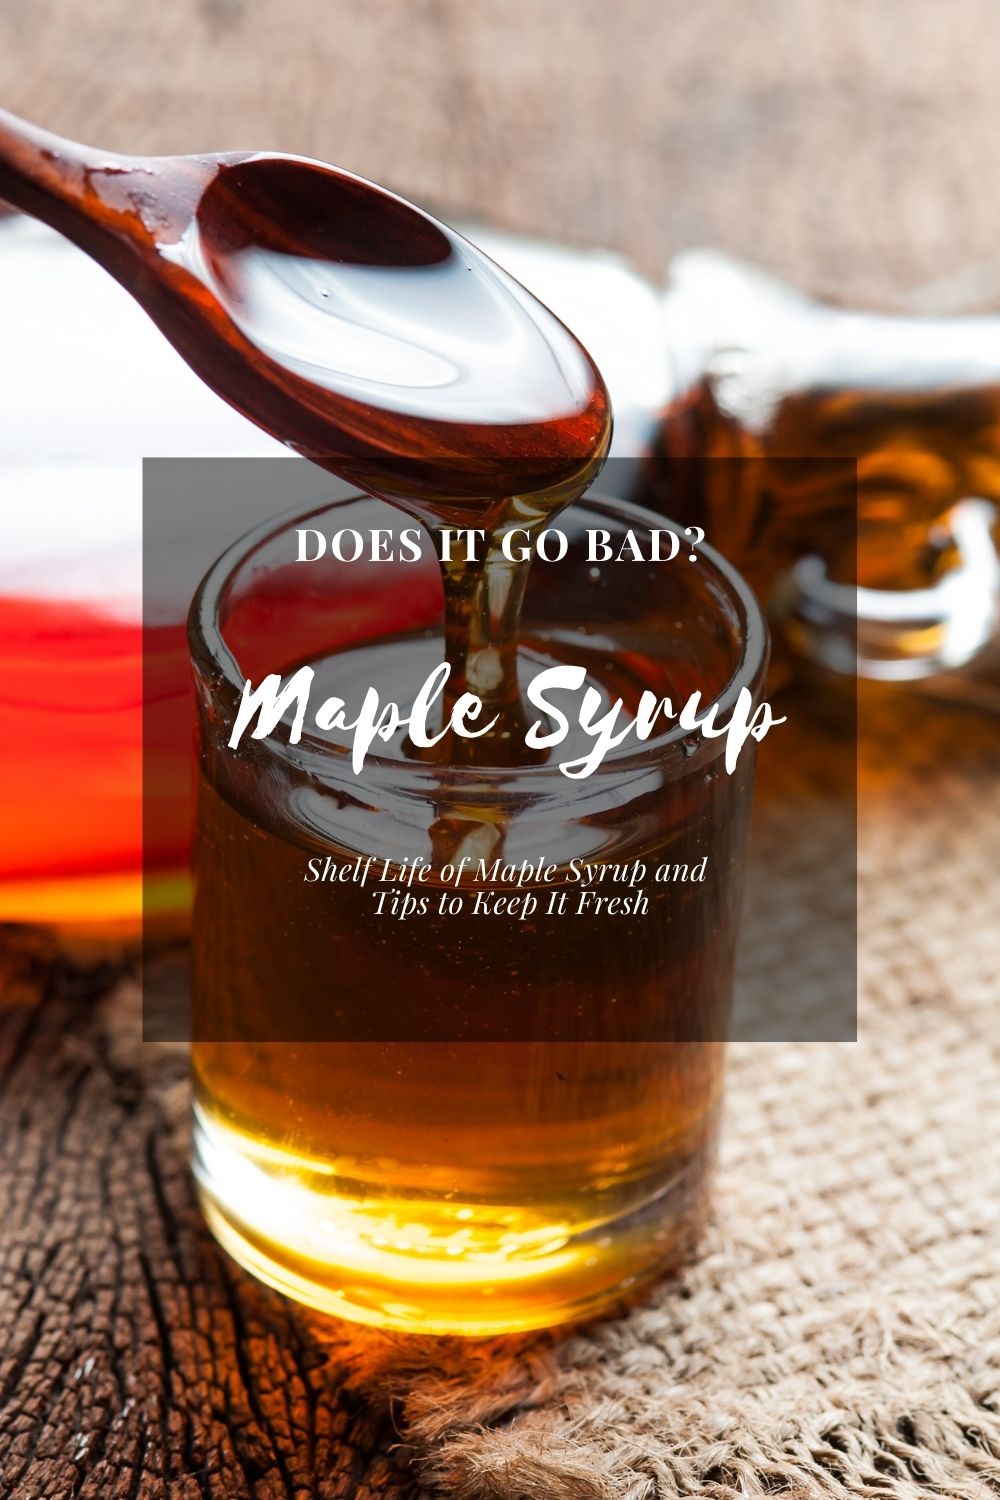 Does Maple Syrup Go Bad? Shelf Life of Maple Syrup and Tips to Keep It Fresh